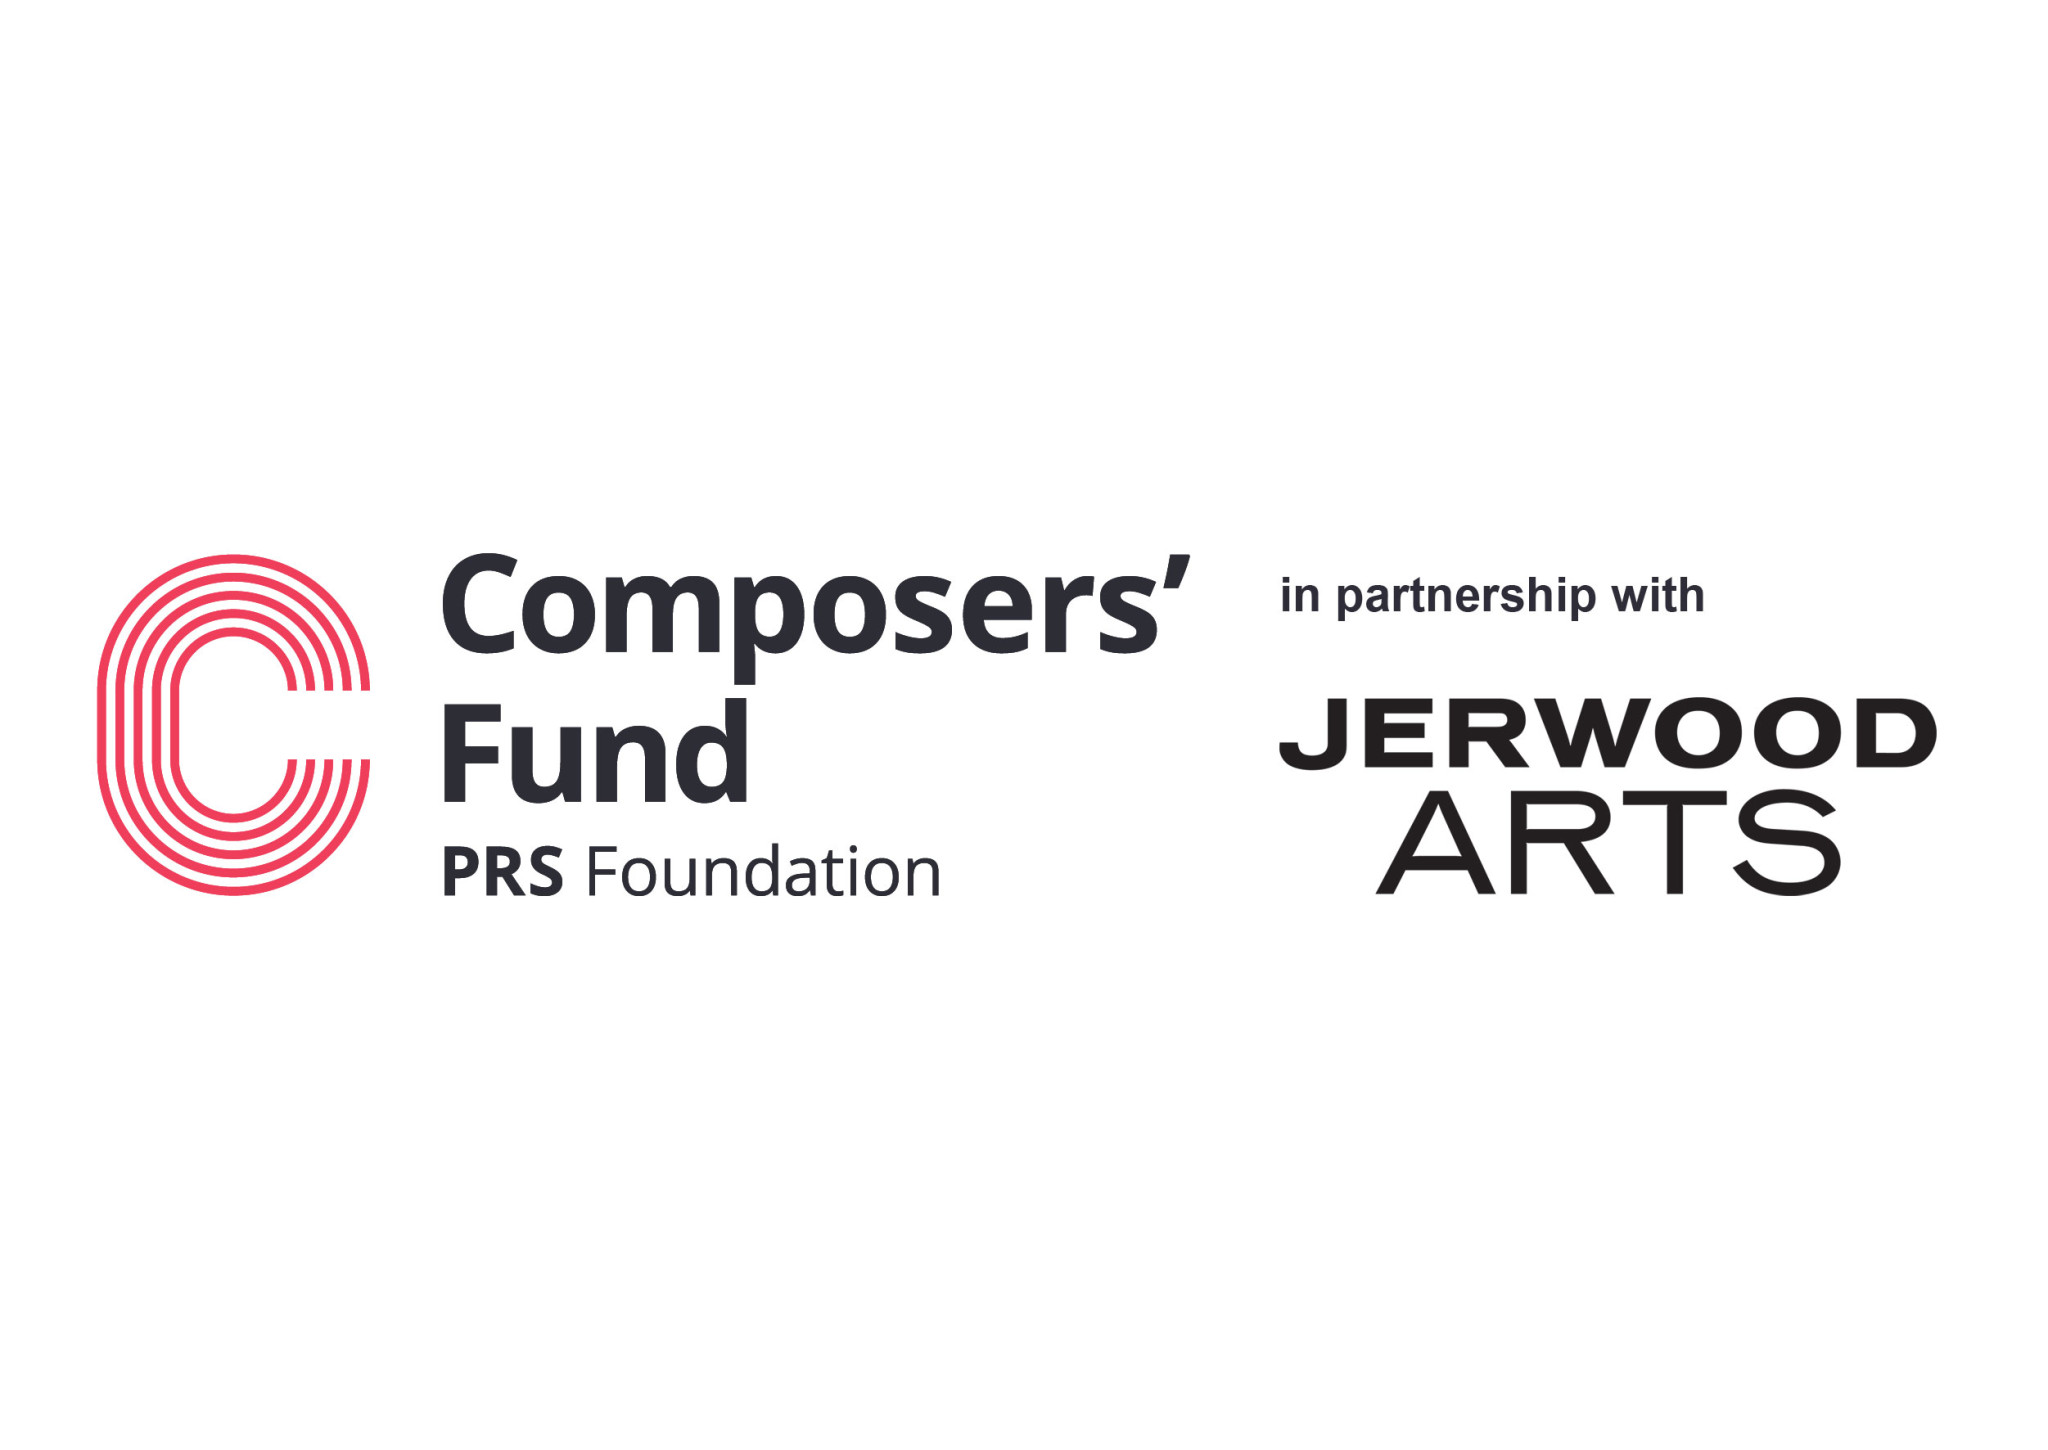 The-Composers-Fund---Jerwood-Arts.jpg